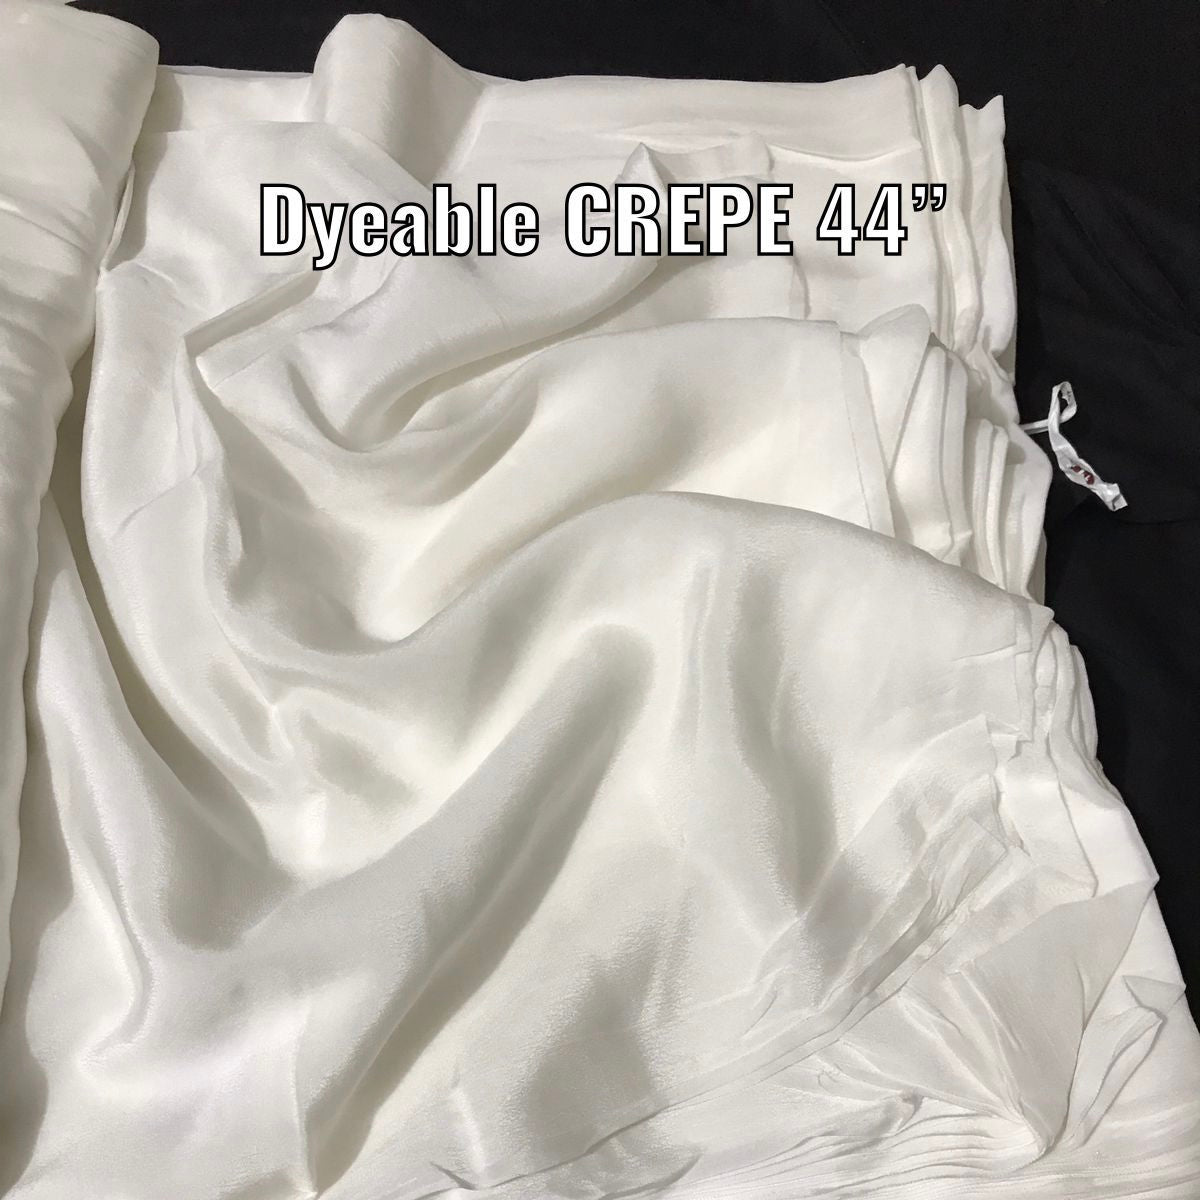 Pure Natural Crepe Dyeable